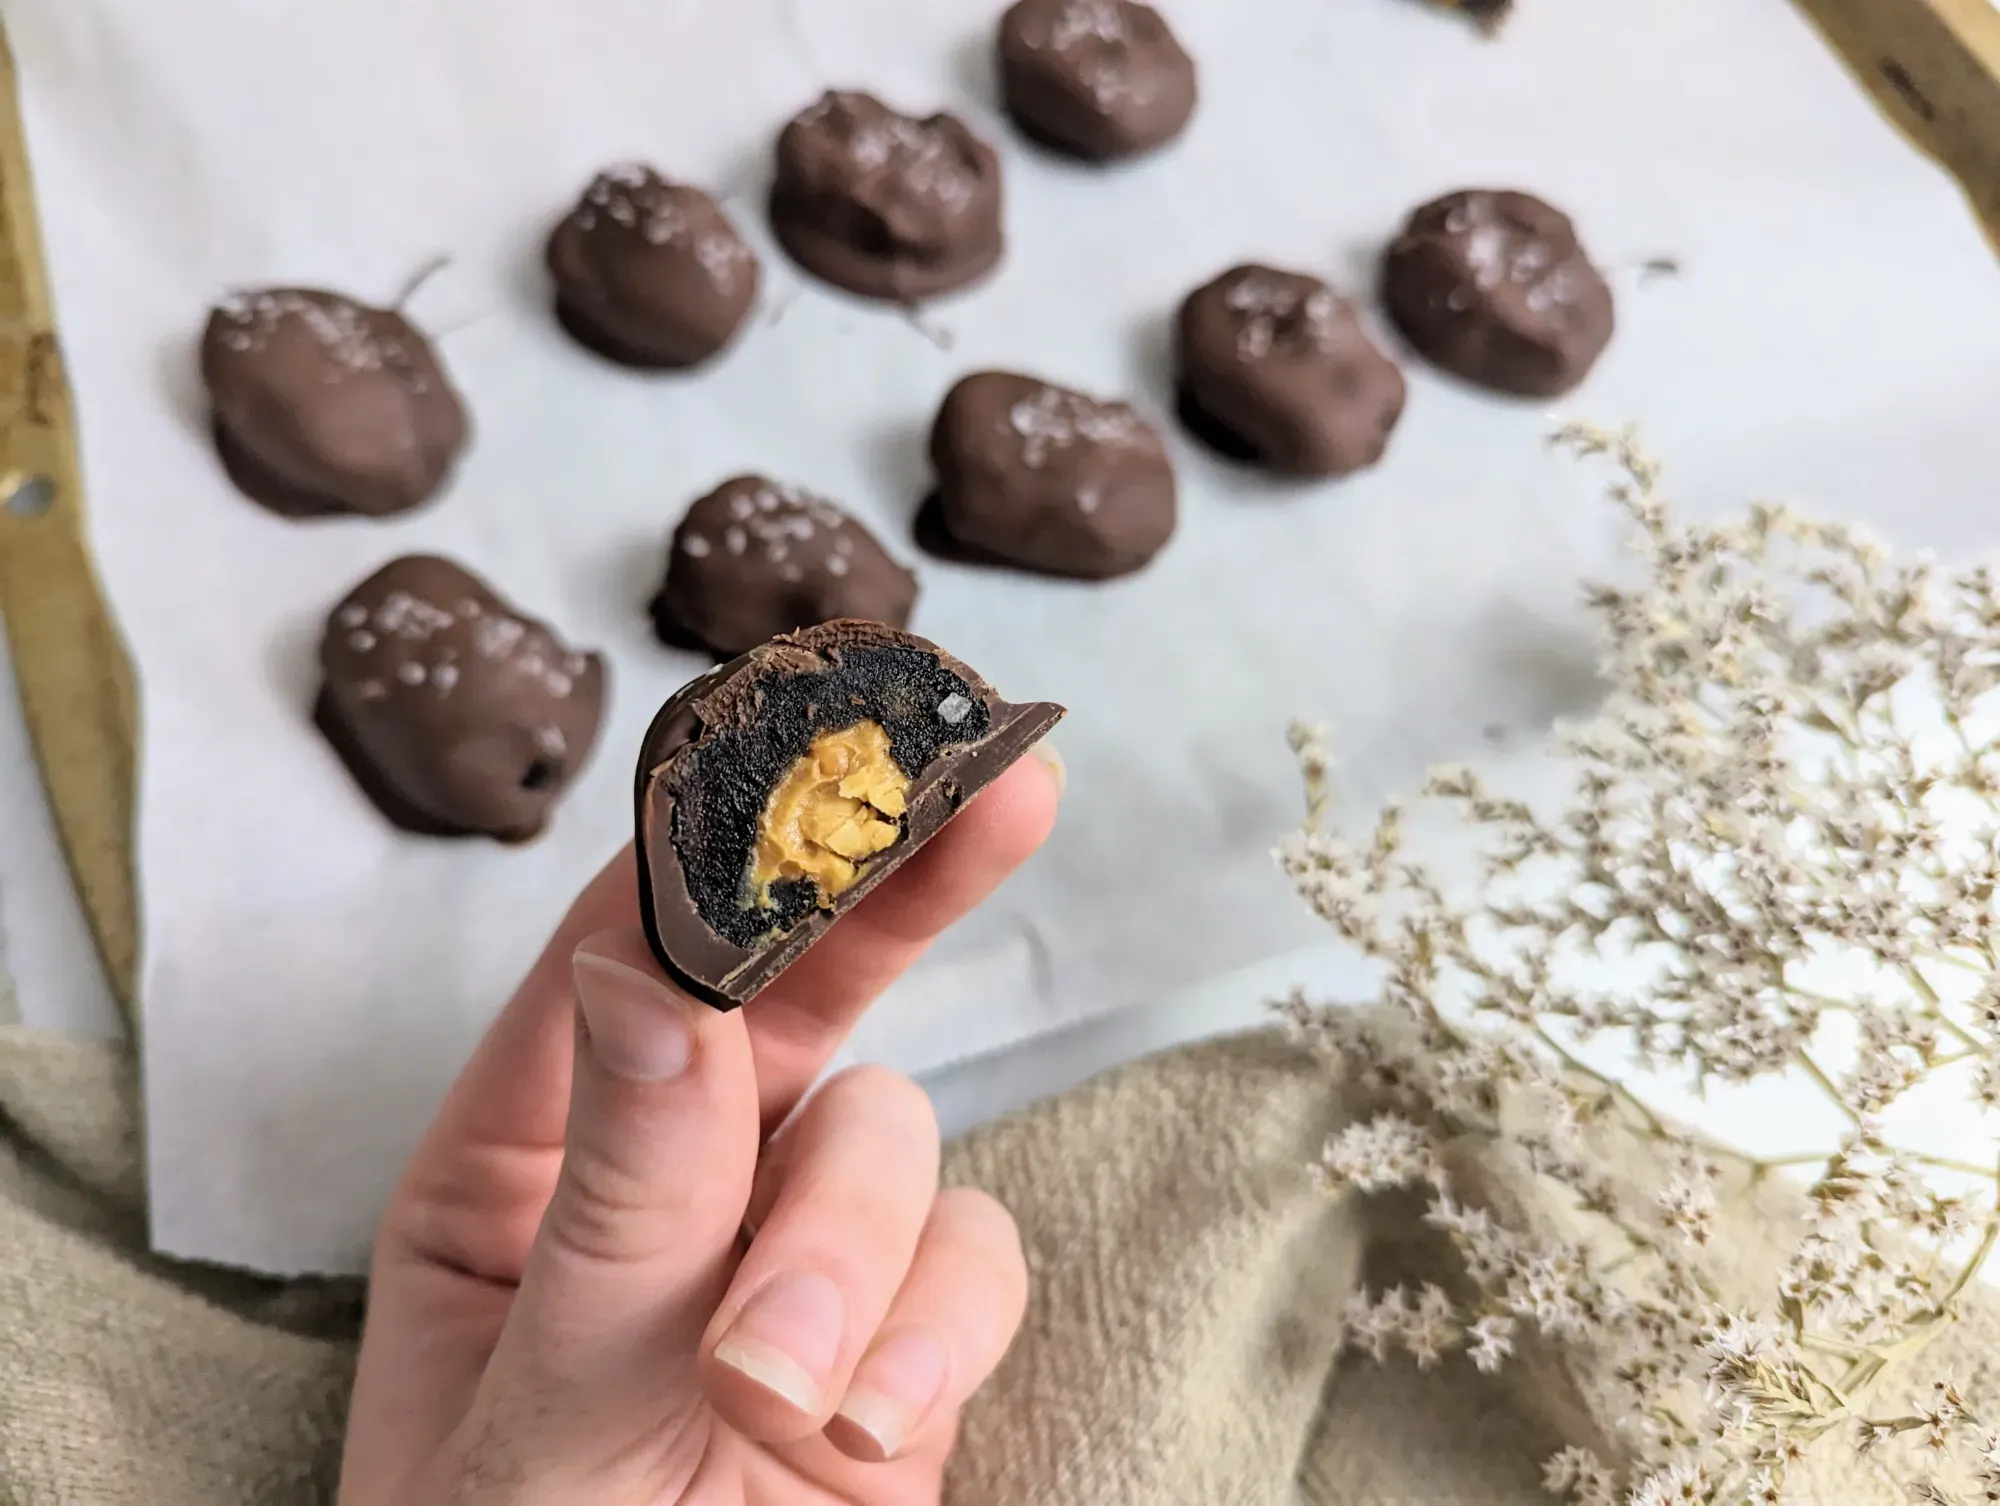 Chocolate-covered dates filled with peanut butter